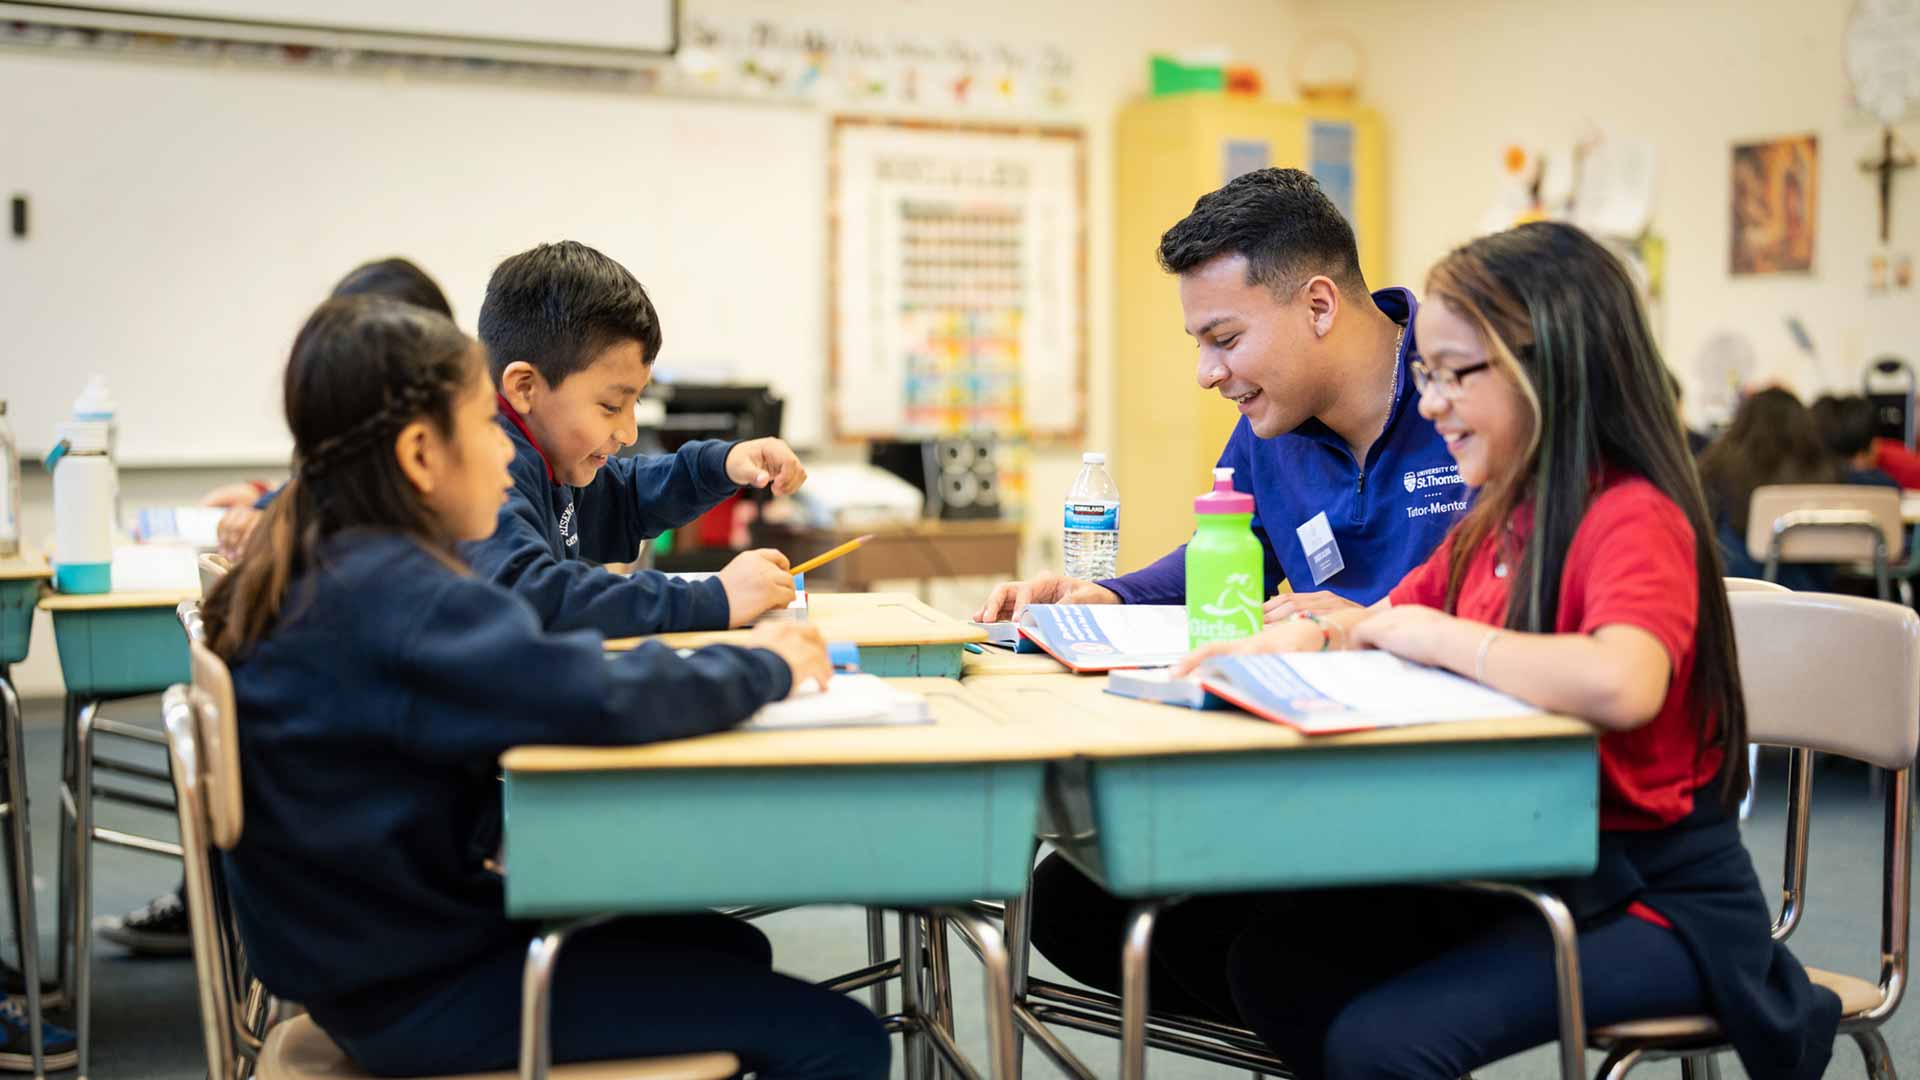 Volunteer works with young students at desk